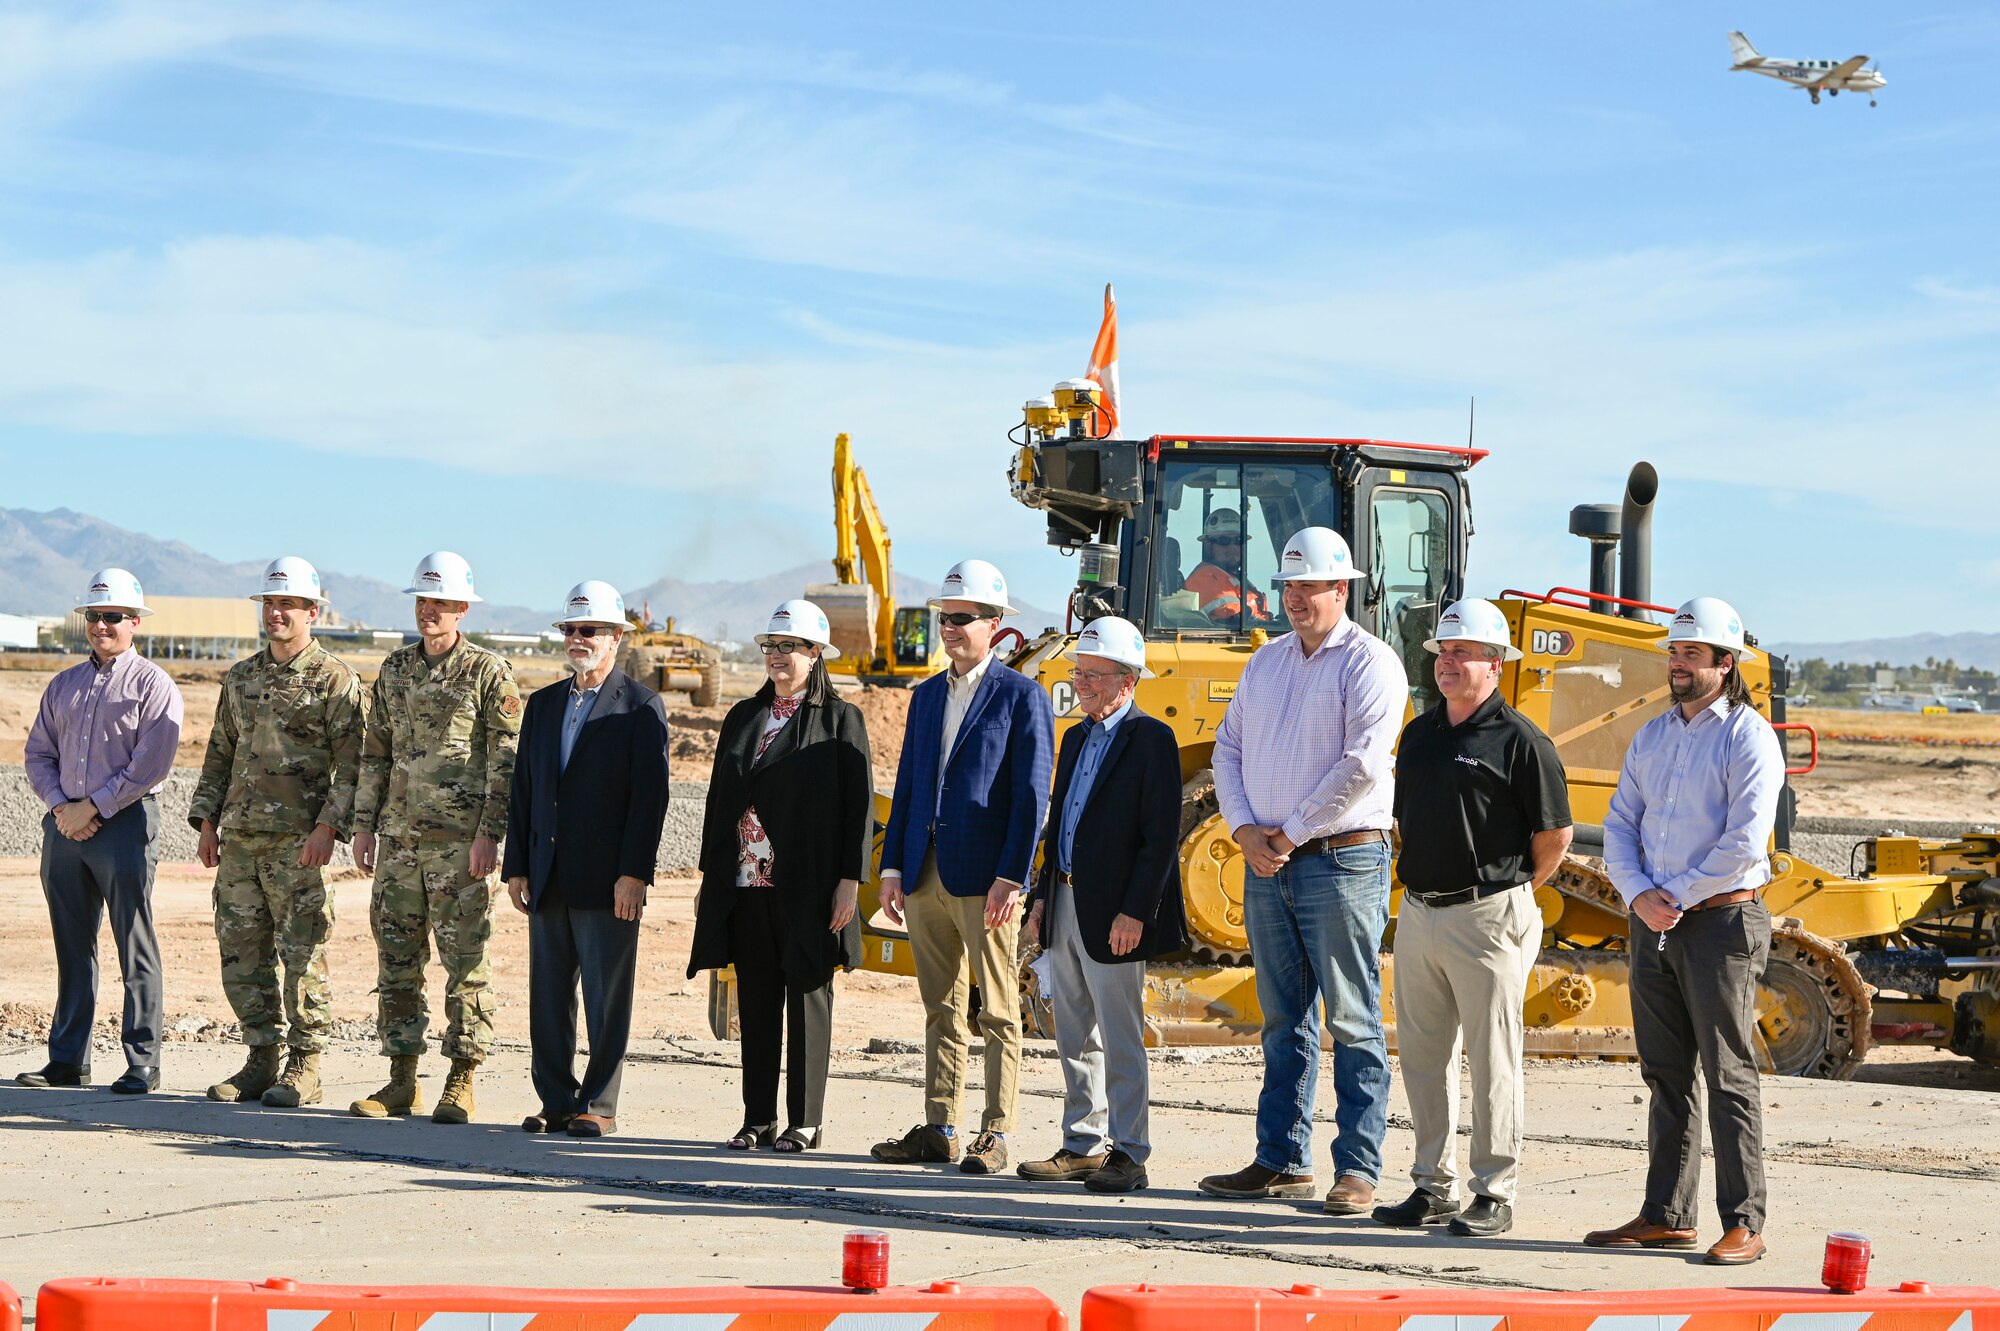 U.S. Air Force Col. Greg Hoffman, commander, 162nd Mission Support Group Commander, 3rd from left and Lt. Col. Paul Boriack, 2nd from left, pose for a photo with members of the Tucson Airport Authority and construction crew leaders to commemorate the start of the End-Around Taxiway Project (referred to as DBB1). The end-around taxiway project is the first of three Design-Bid-Build (DBB) projects associated with the Airfield Safety Enhancement Program at the Tucson International Airport.